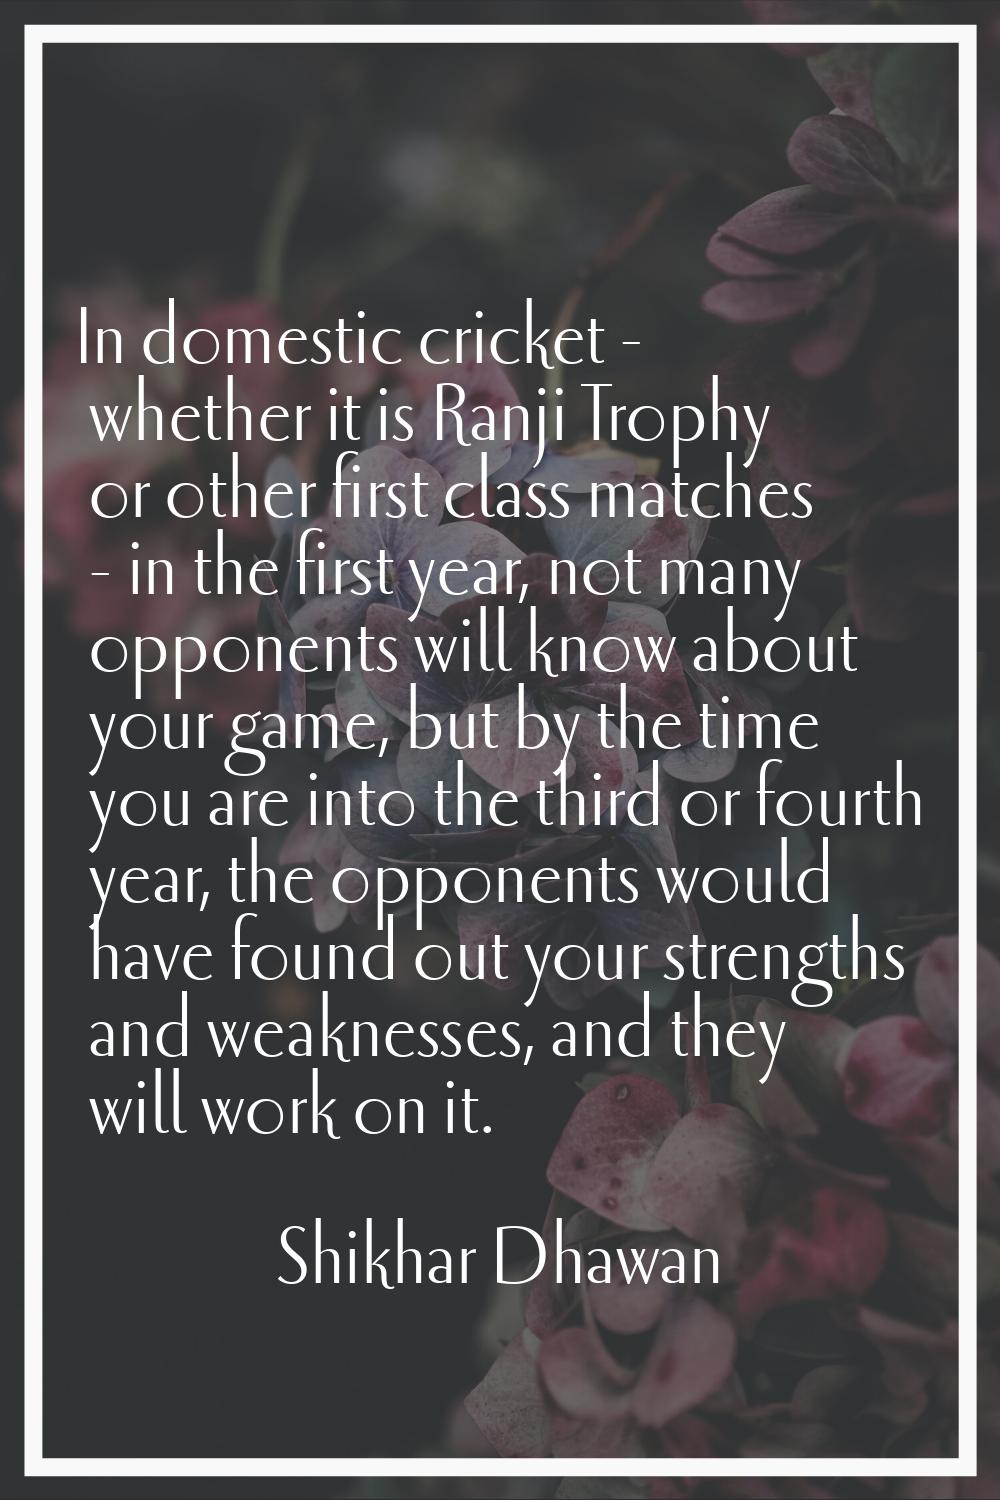 In domestic cricket - whether it is Ranji Trophy or other first class matches - in the first year, 